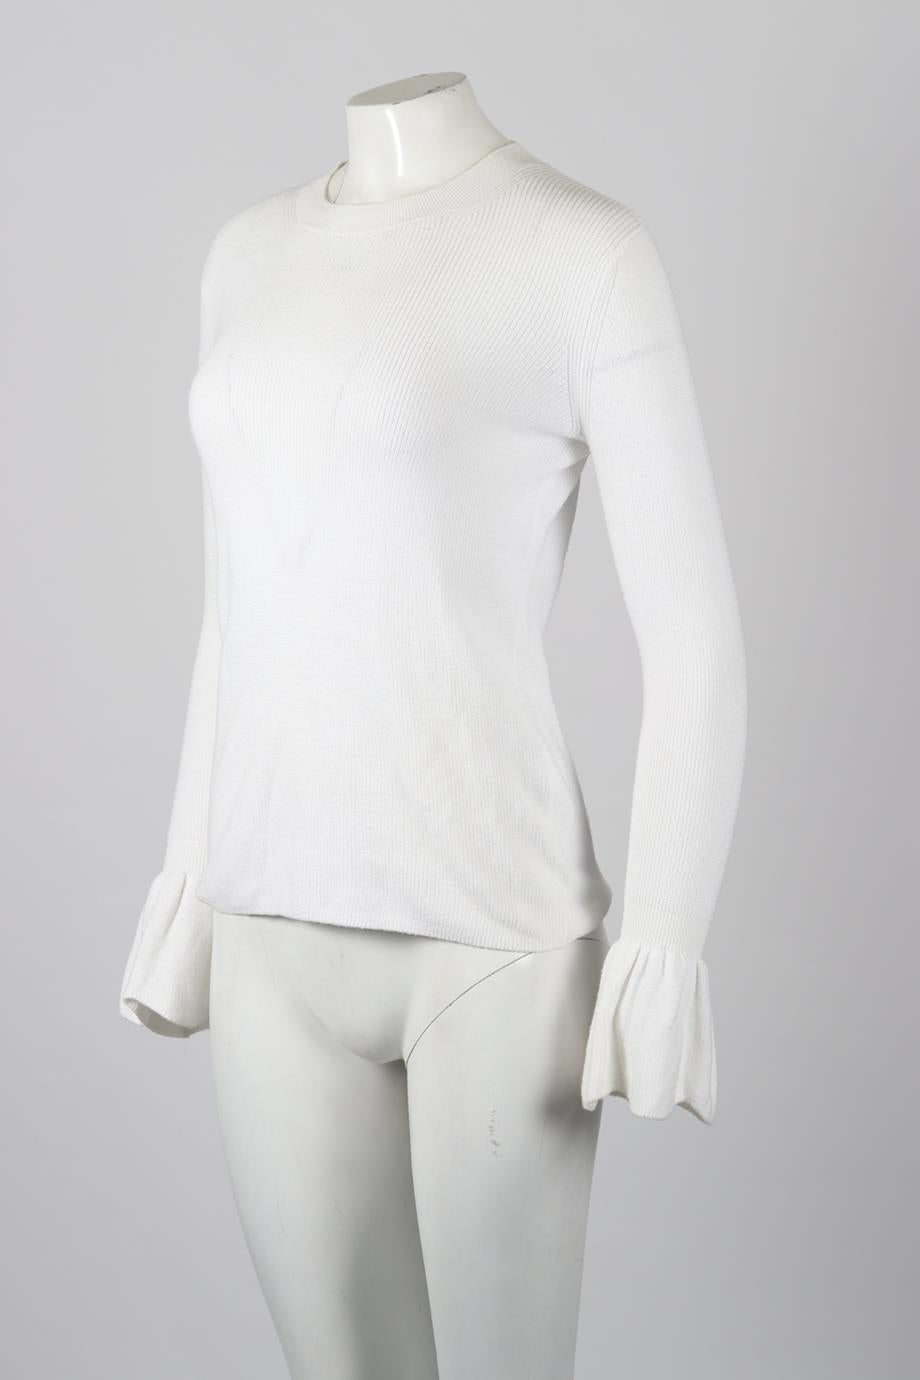 SEE BY CHLOÉ RIBBED COTTON SWEATER XSMALL